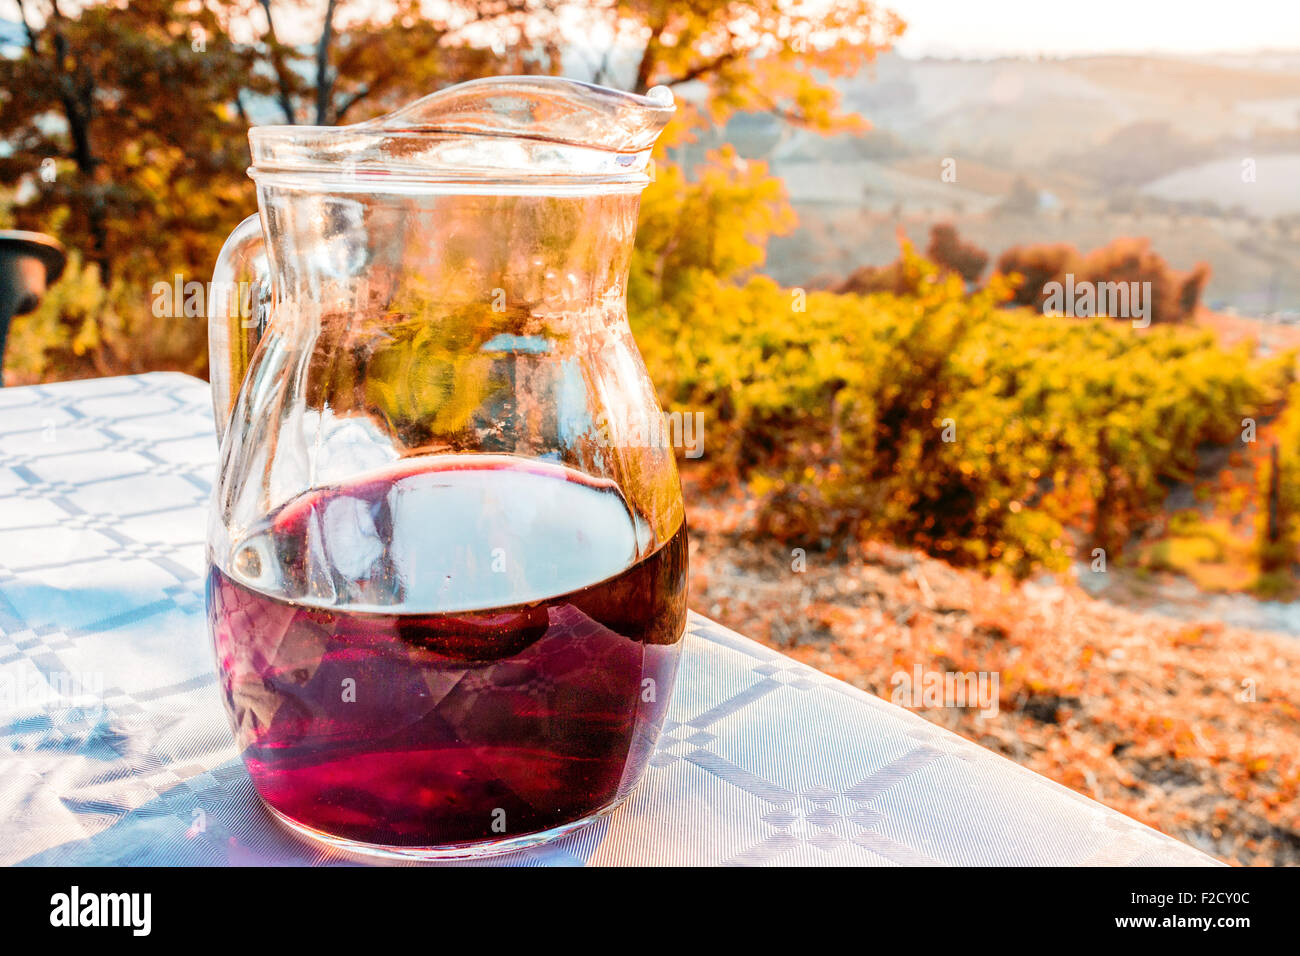 jug of genuine and non-industrial wine on a table with vineyards, farmlands and green vegetation of the countryside in the background Stock Photo